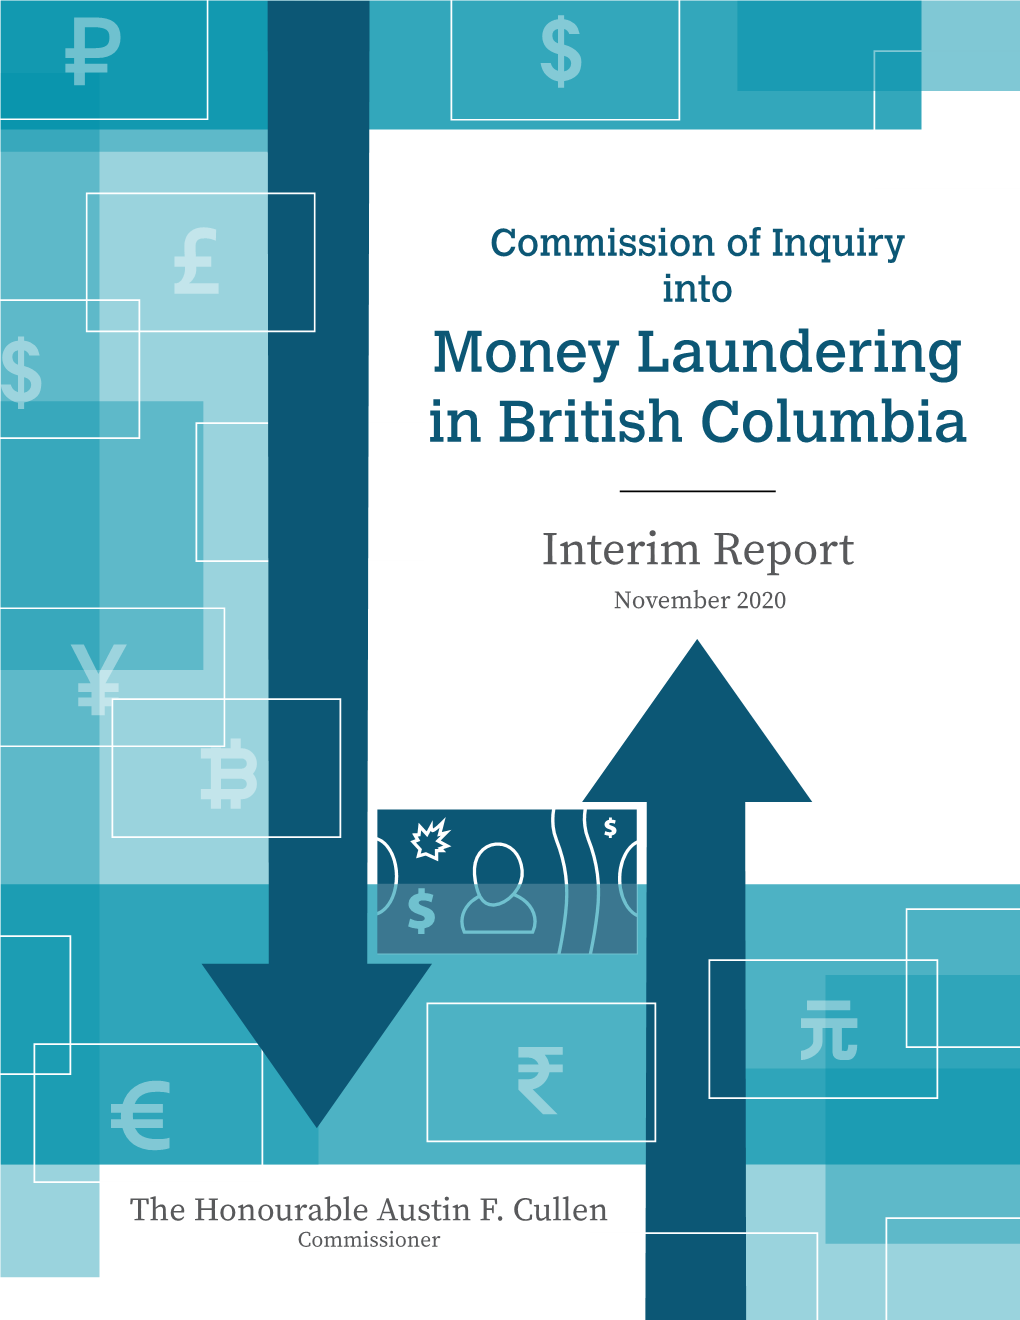 Interim Report from the Commission of Inquiry Into Money Laundering in British Columbia